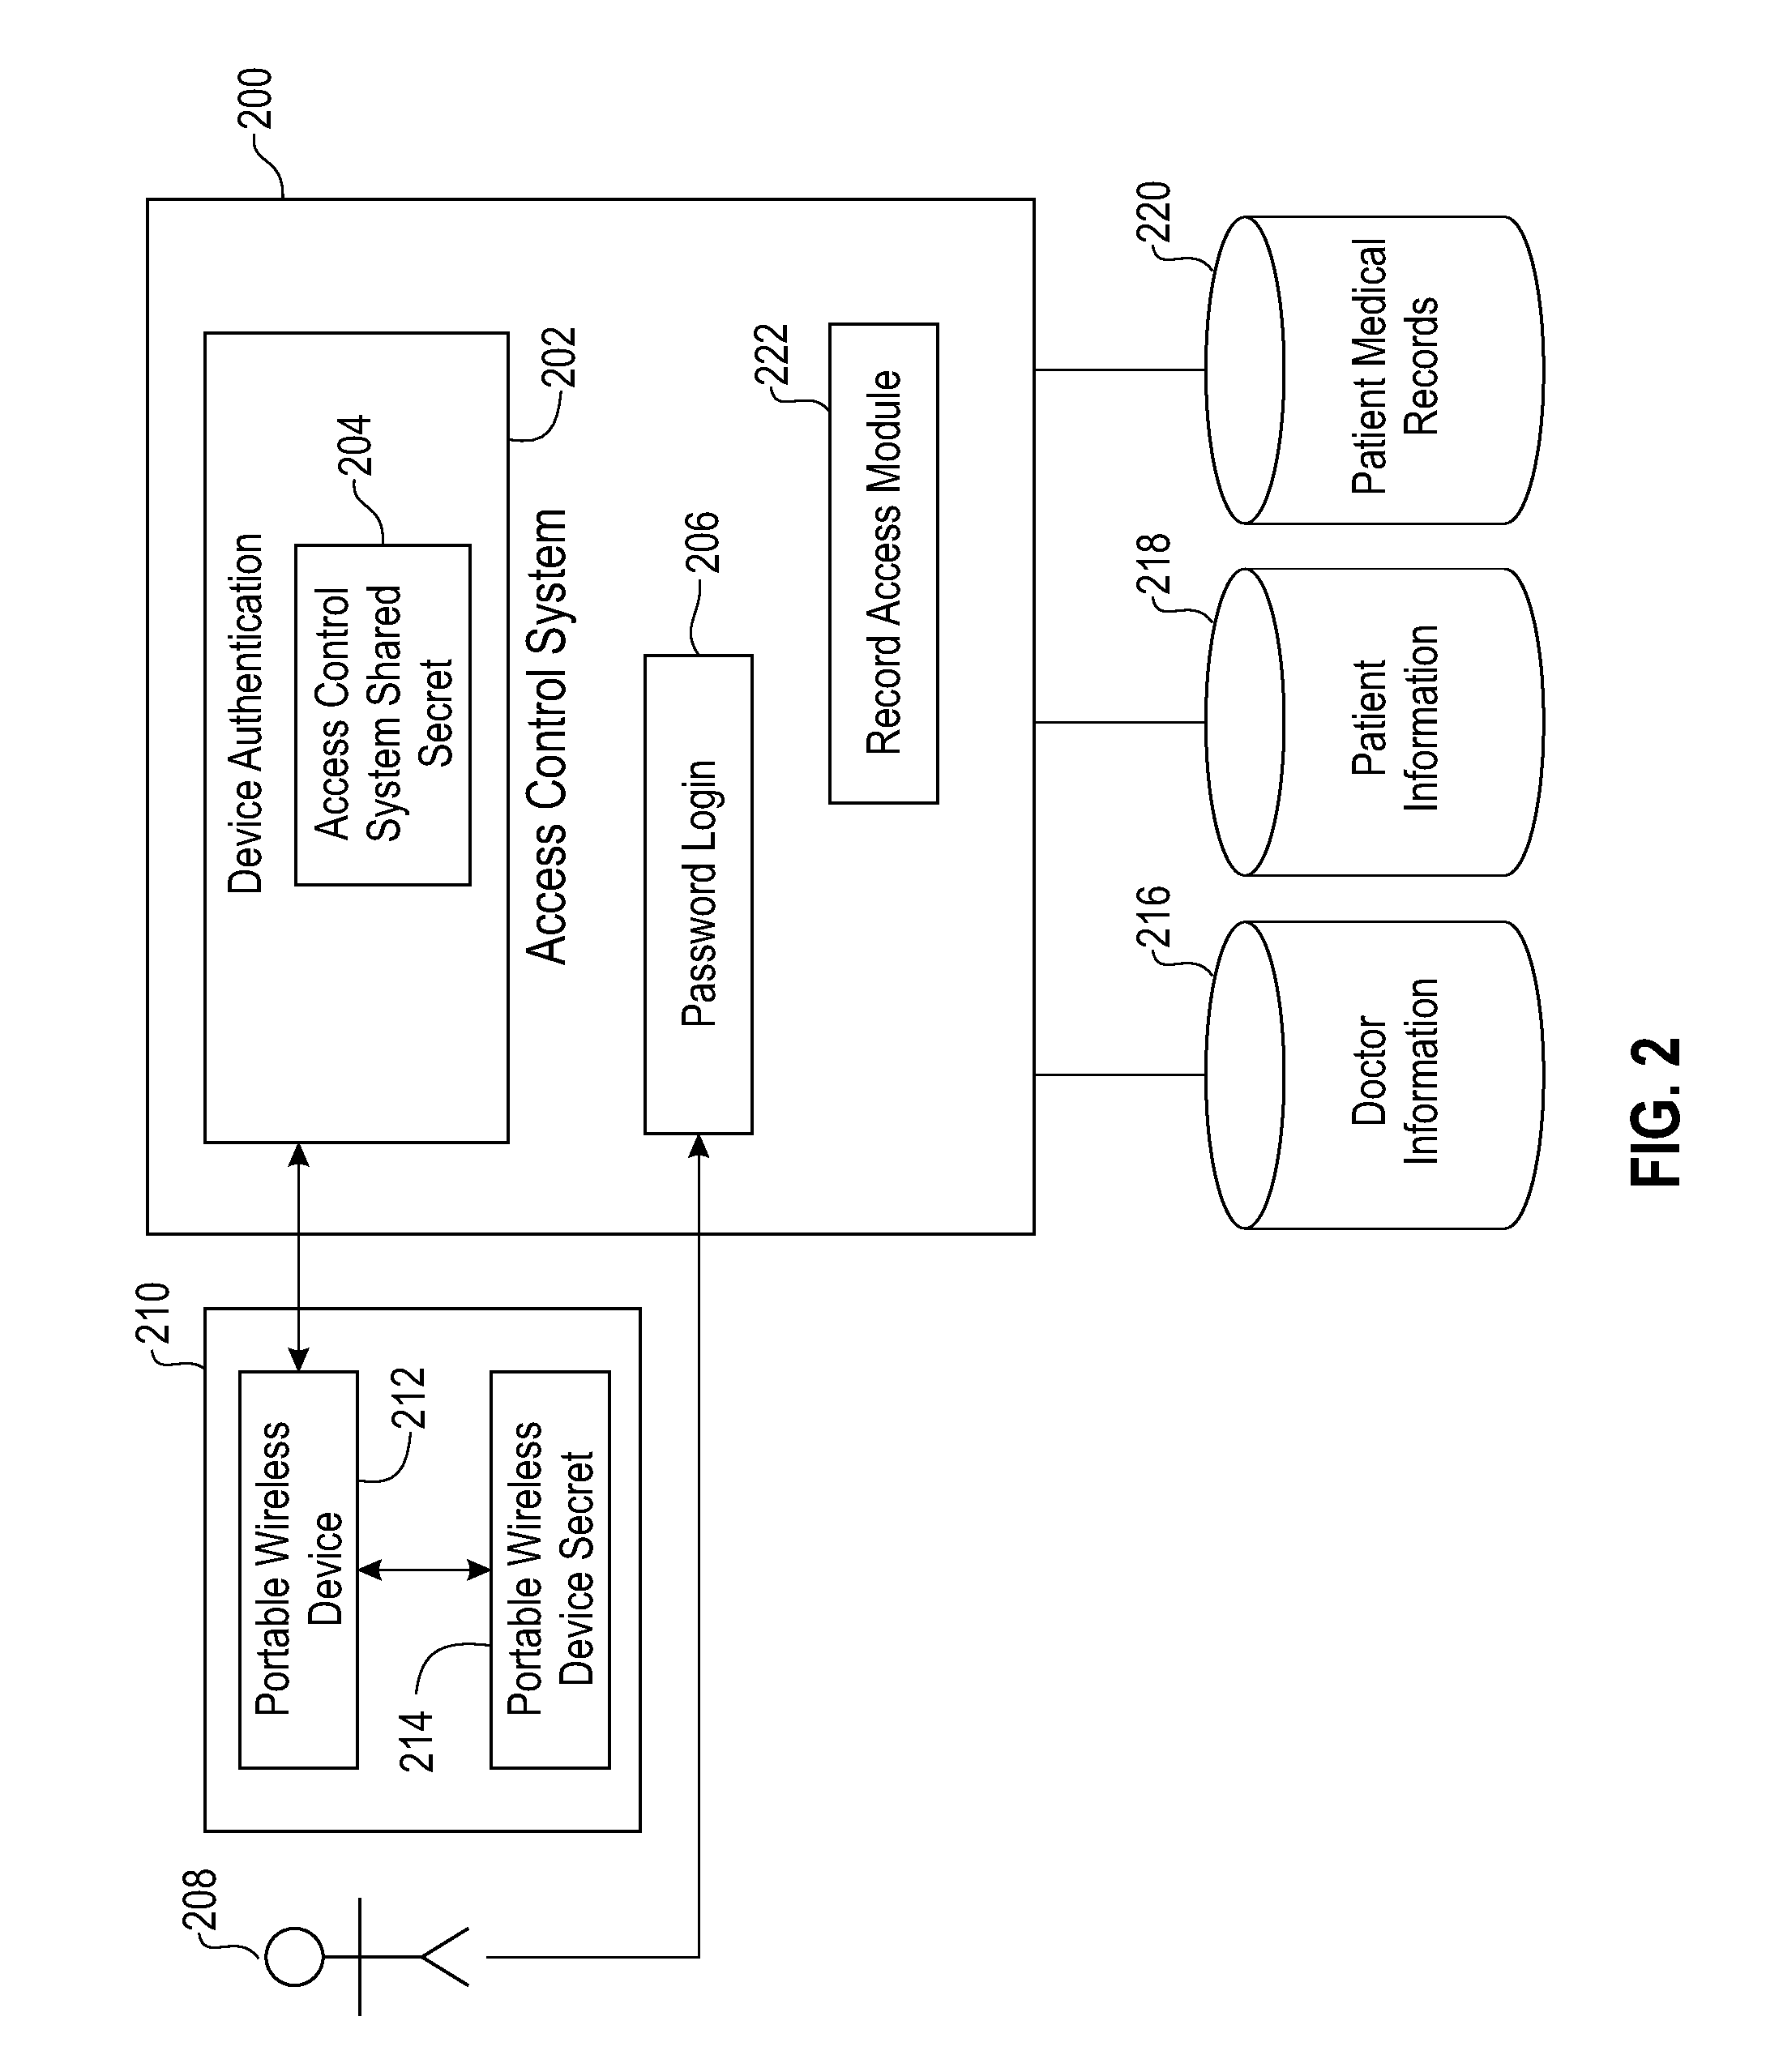 Secure and usable authentication for health care information access